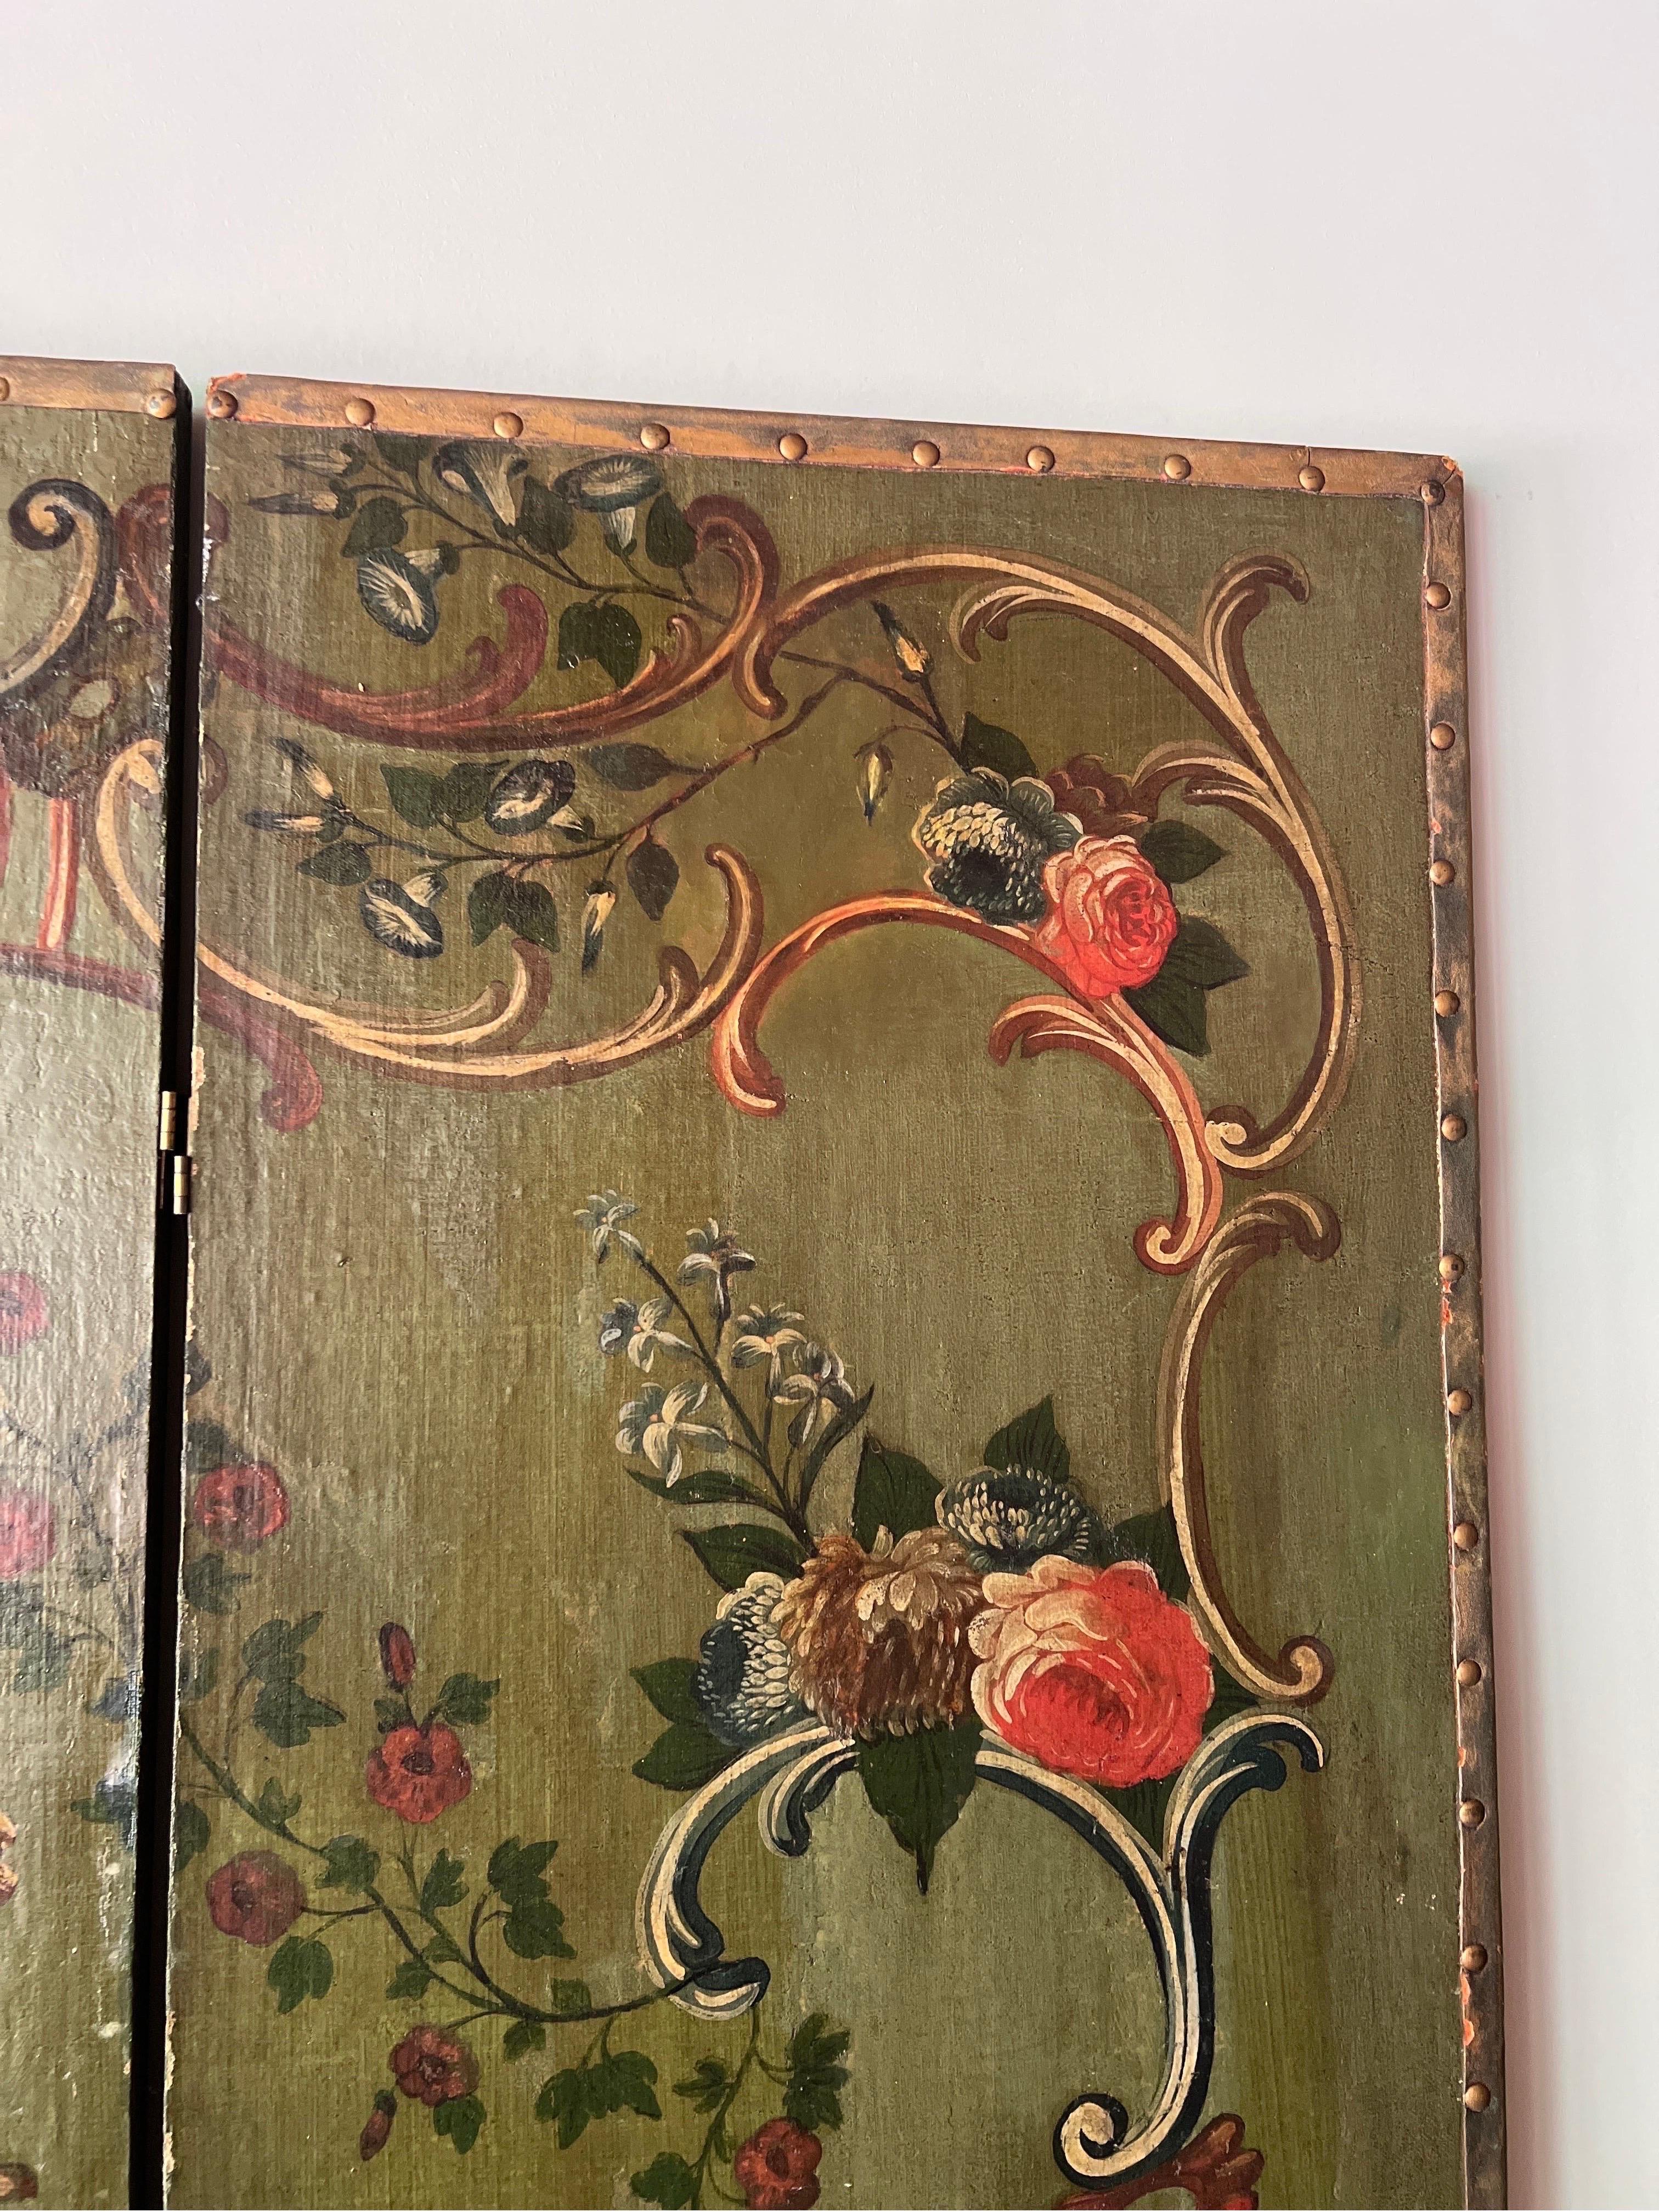 19th Century Italian Floral Painted 3 Panel Folding Floor Screen / Room Divider For Sale 2